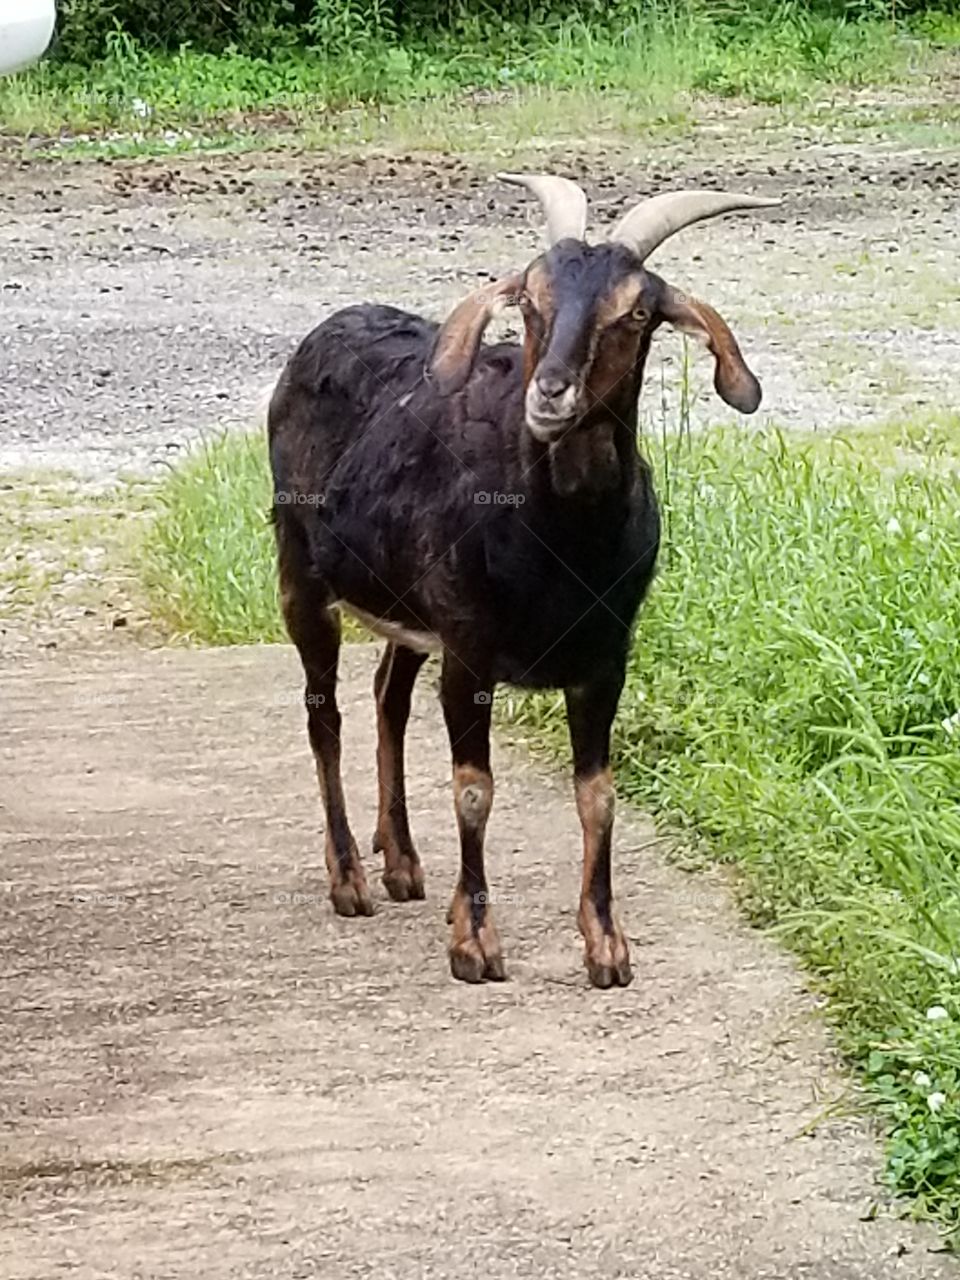 Ornery old goat